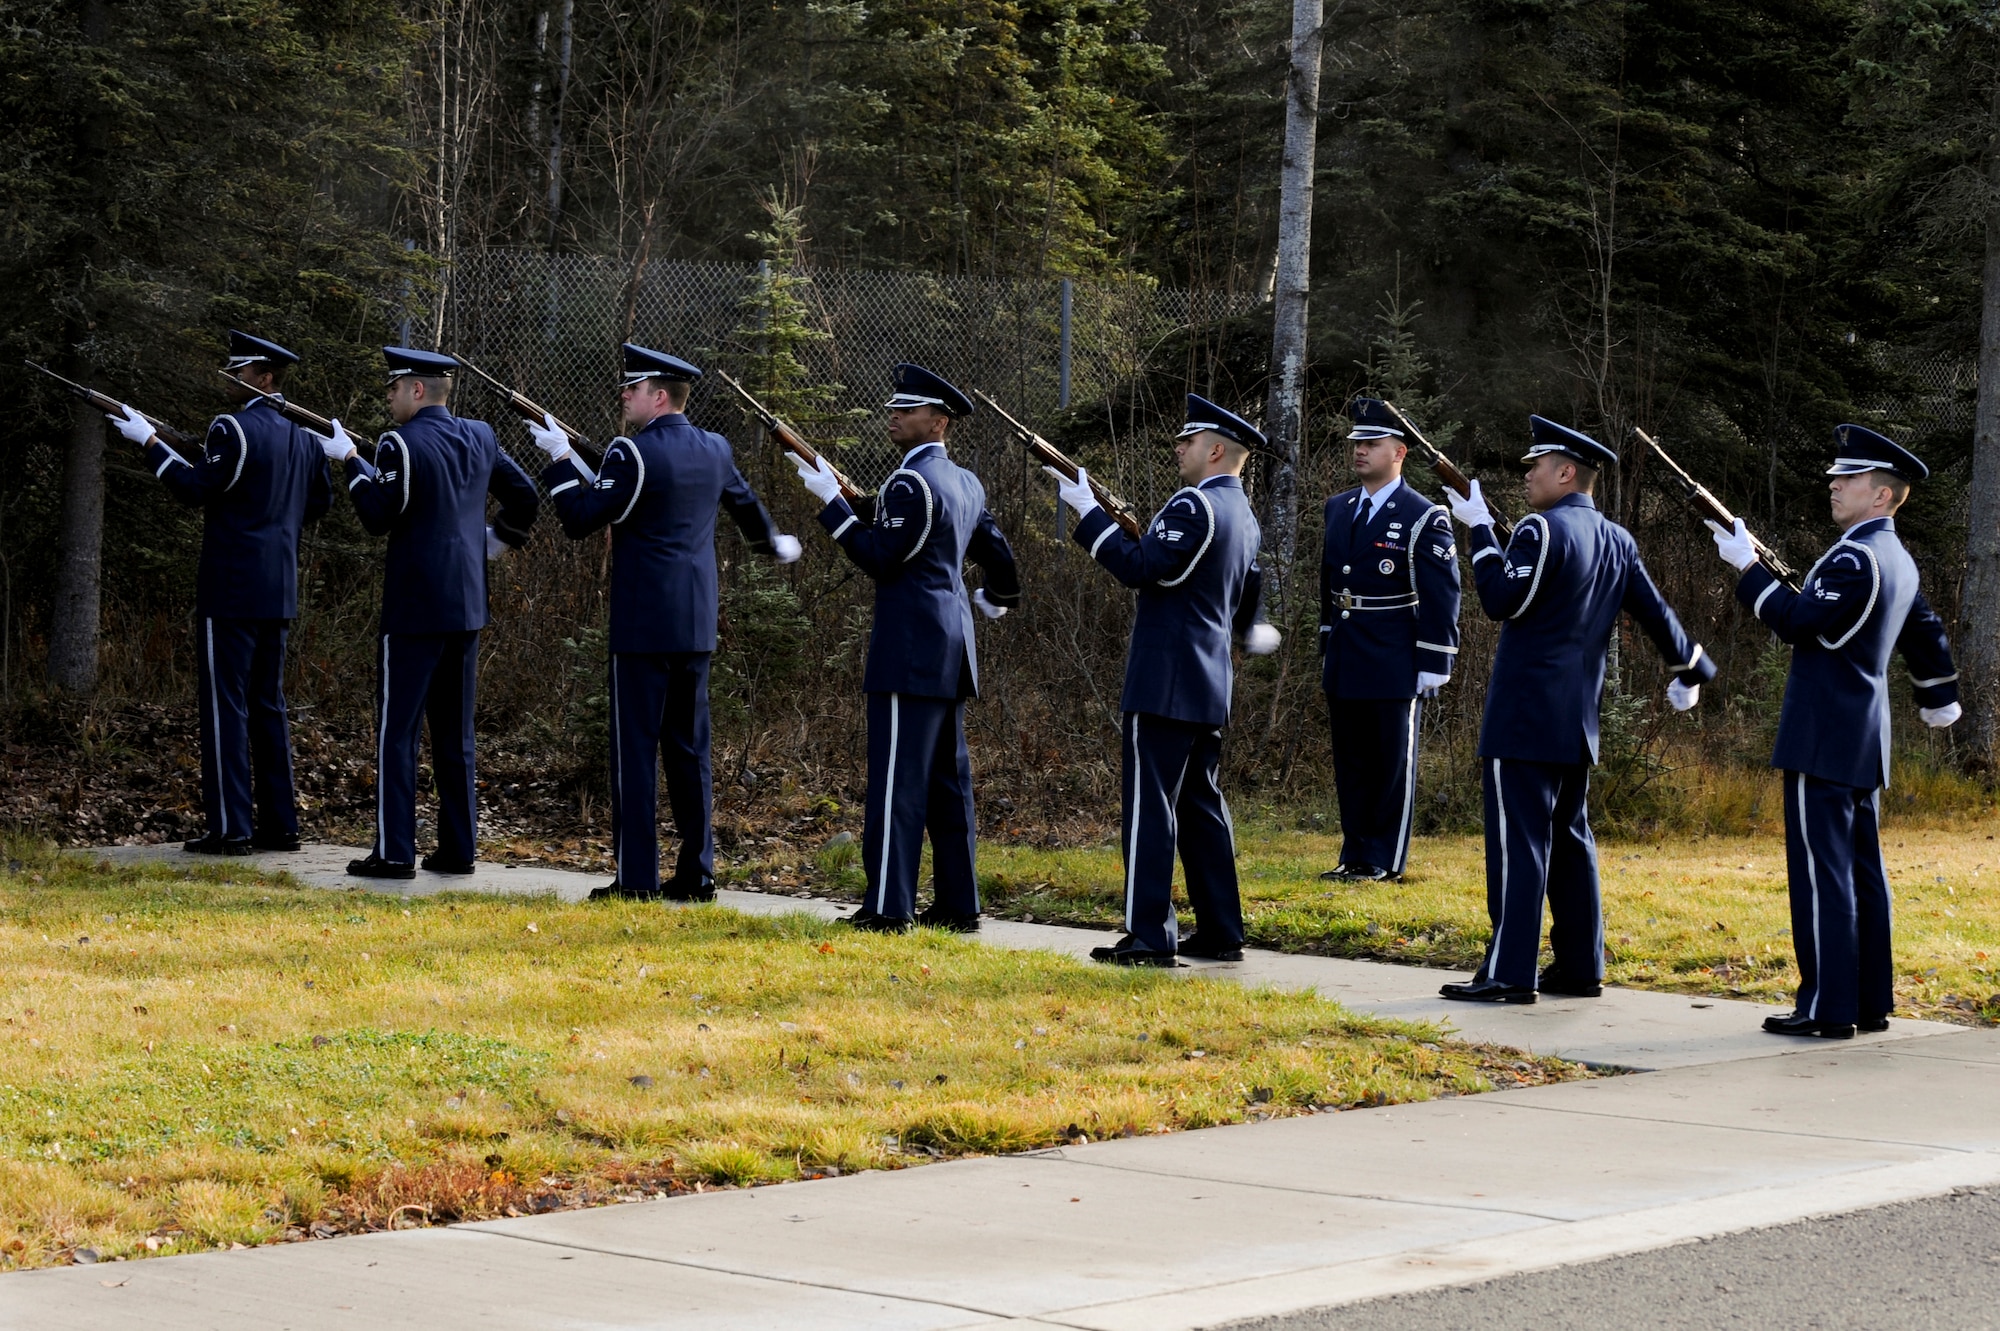 FORT RICHARDSON, Alaska -- Members of the Elmendorf Air Force Base Honor Guard perform a 21-gun salute during the funeral service for Staff Sgt. Shawn Rankin, here at the Fort Richardson National Cemetery Oct. 15. Rankin of Anchorage, Alaska, was assigned to the 56th Aircraft Maintenance Squadron and served as an F-16 Fighting Falcon crew chief at Luke Air Force Base, Ariz. (U.S. Air Force photo/Staff Sgt. Joshua Garcia)